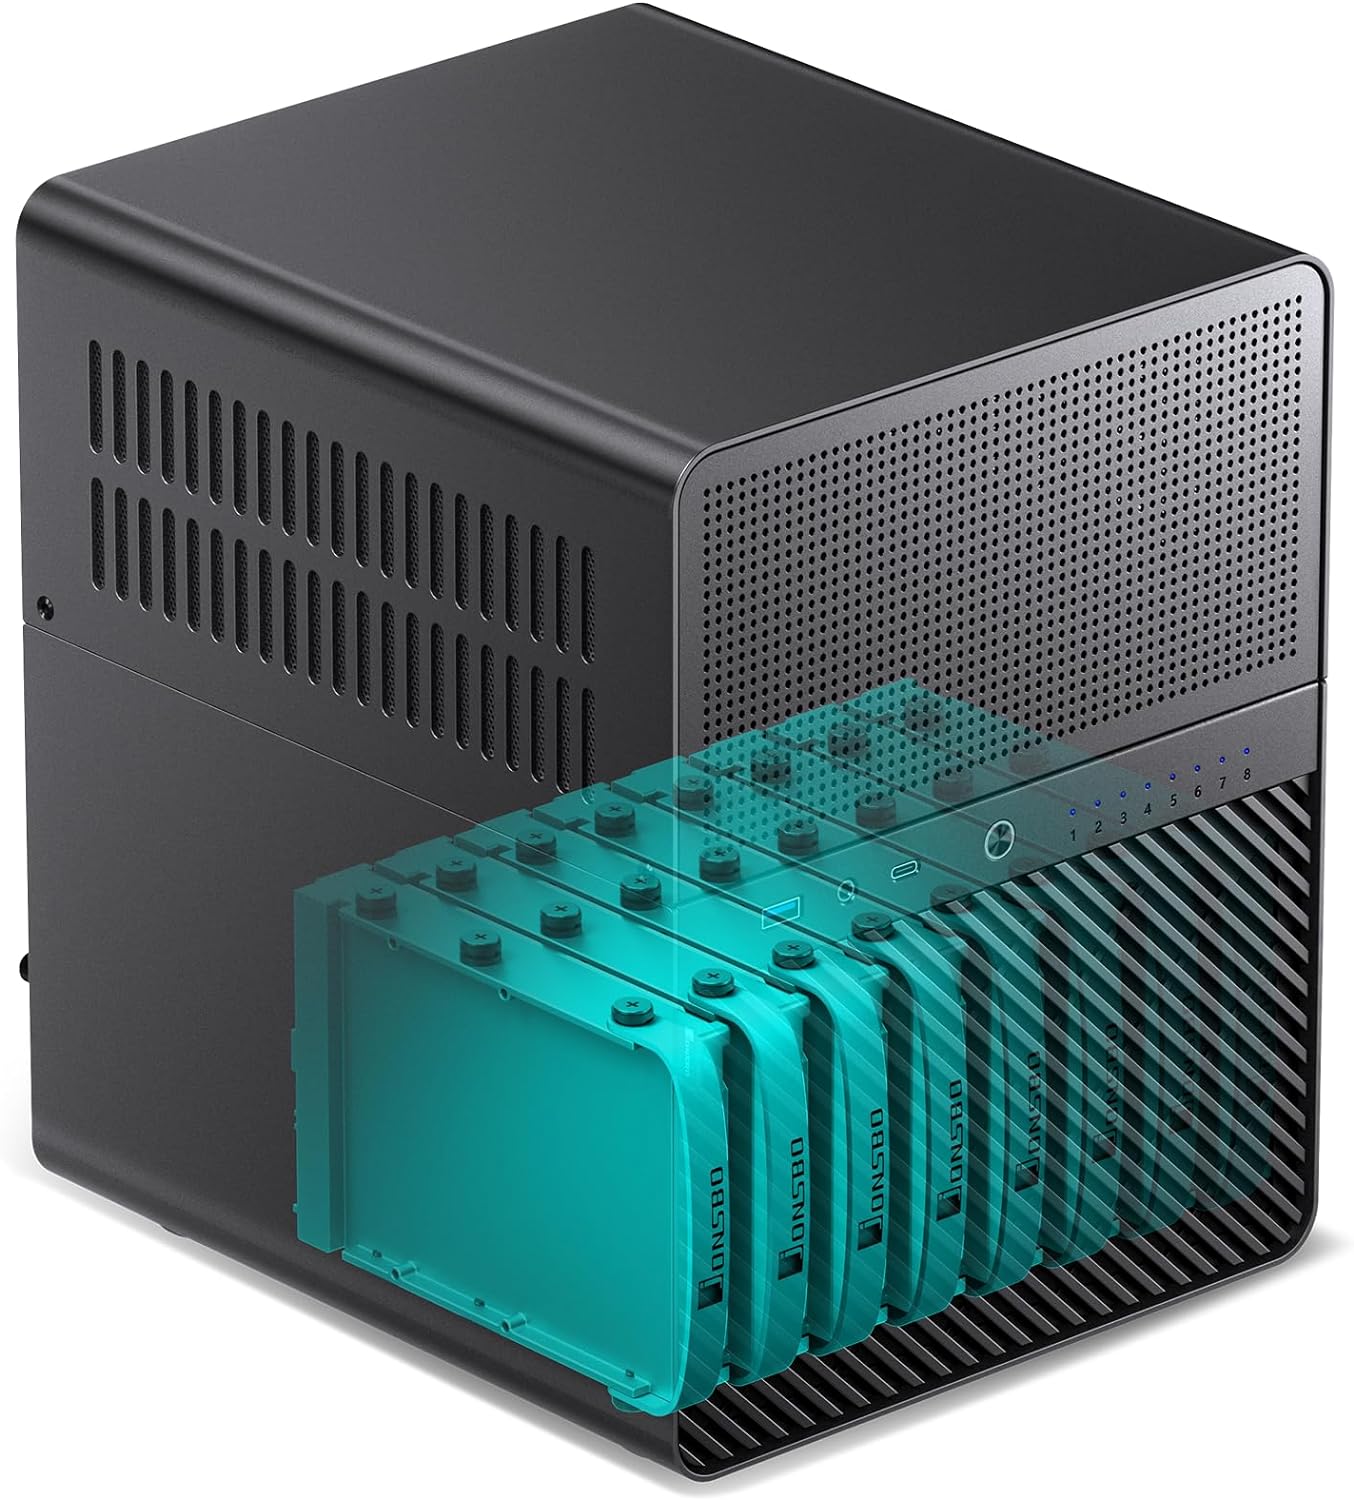 JONSBO N3 Mini-ITX NAS PC Chassis, ITX Computer Case, 8HHD+1-SSDD isk Bays NAS Mini Aluminum with Steel Plate Case, Built-in 2x10cm Fan, Power Support: SFX105mm, Support 130mm CPU Cooler